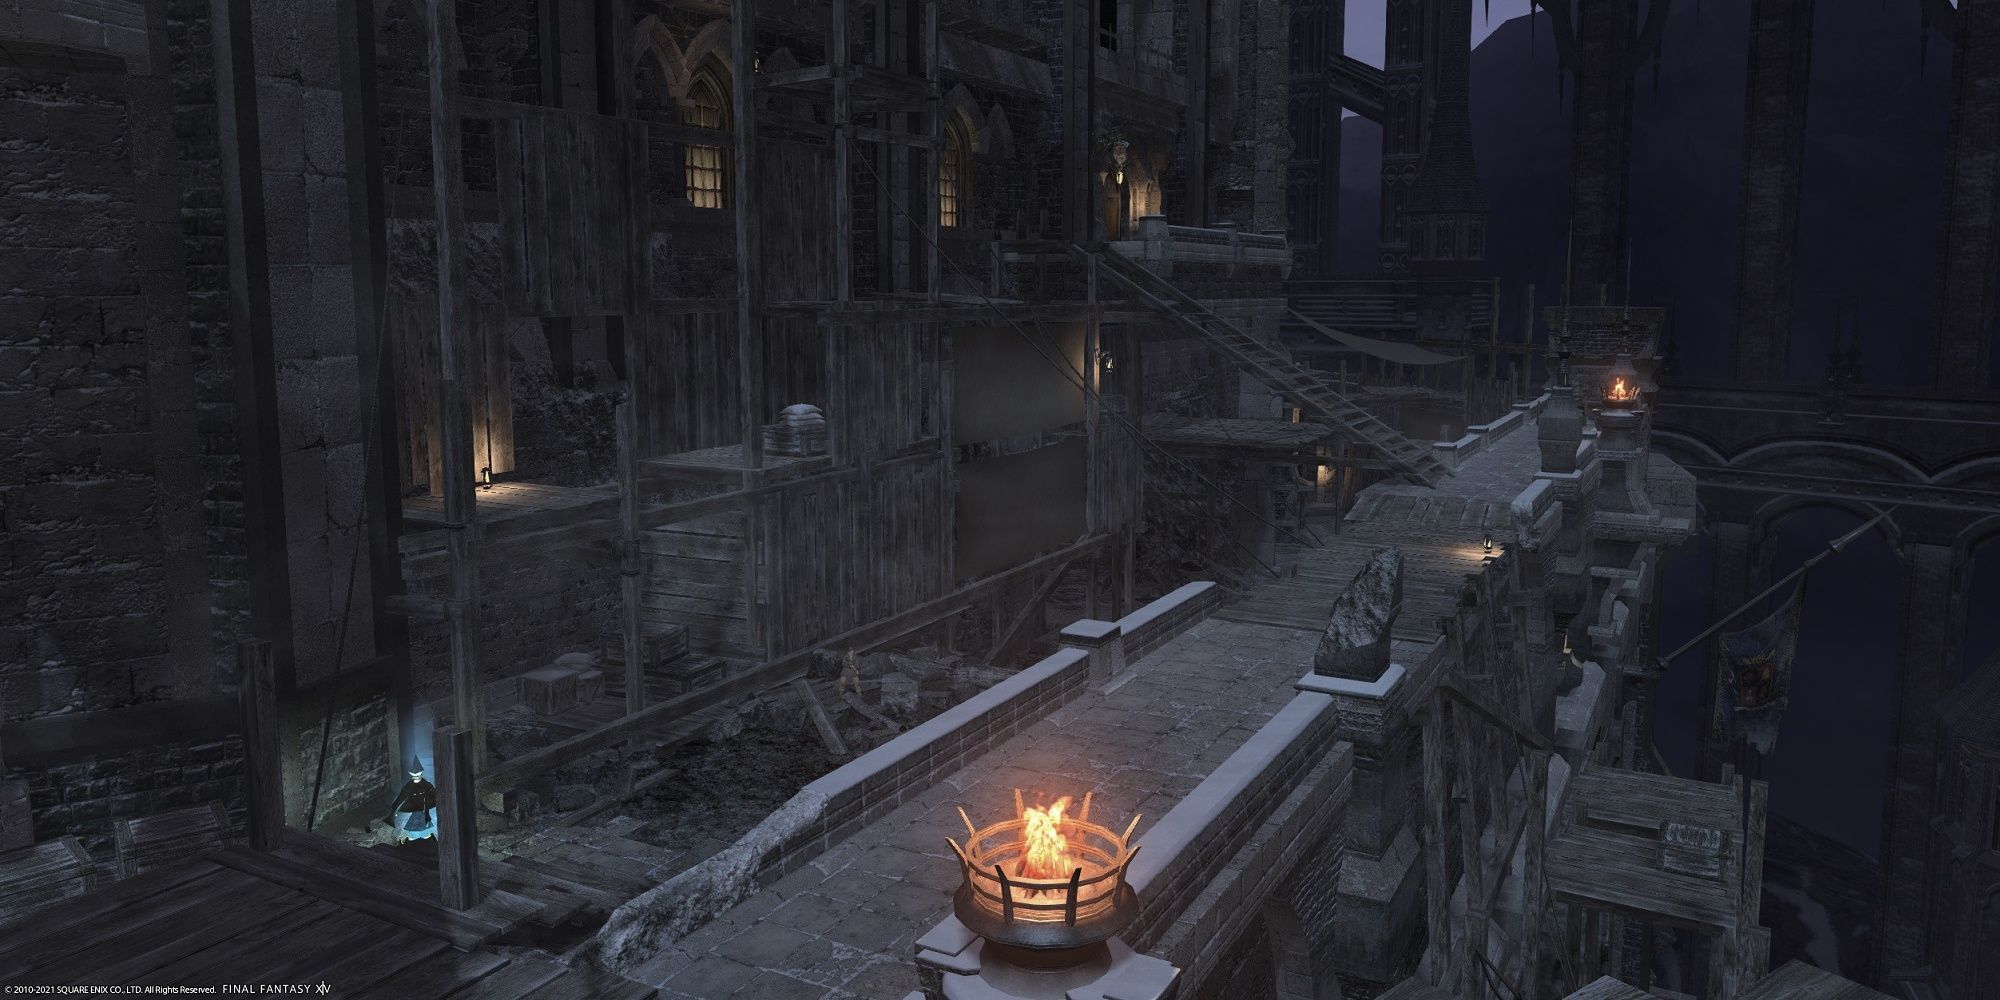 The Brume district of Ishgard seen at Night with flaming braziers lighting the street